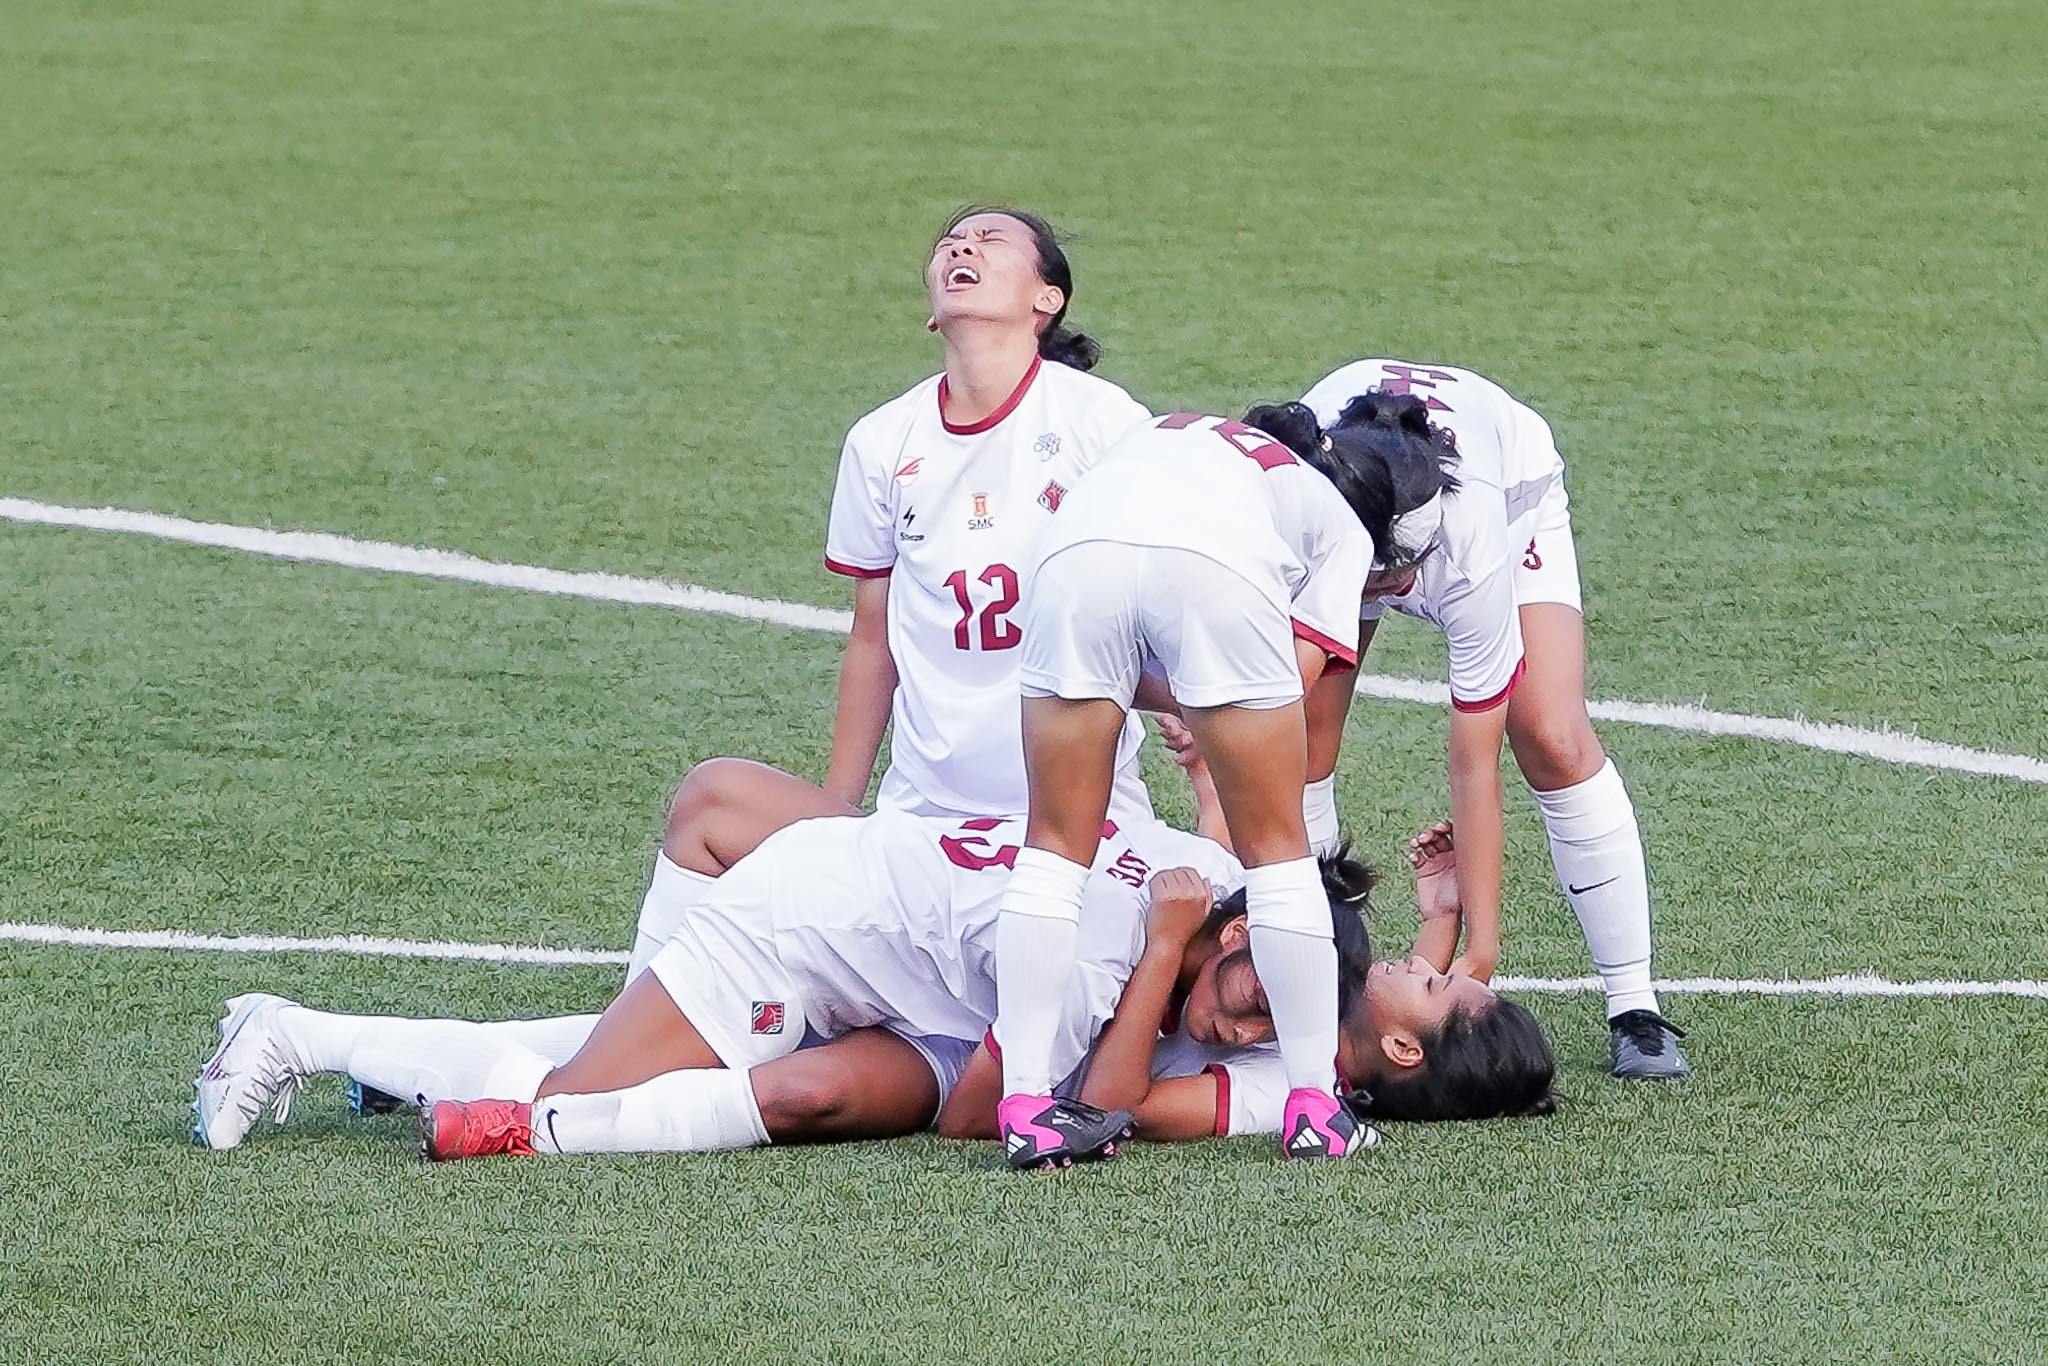 UAAP-85-Womens-Football-UP Alyssa Ube scores hopes breakthrough goal gives her much-needed confidence Football News UAAP UP  - philippine sports news